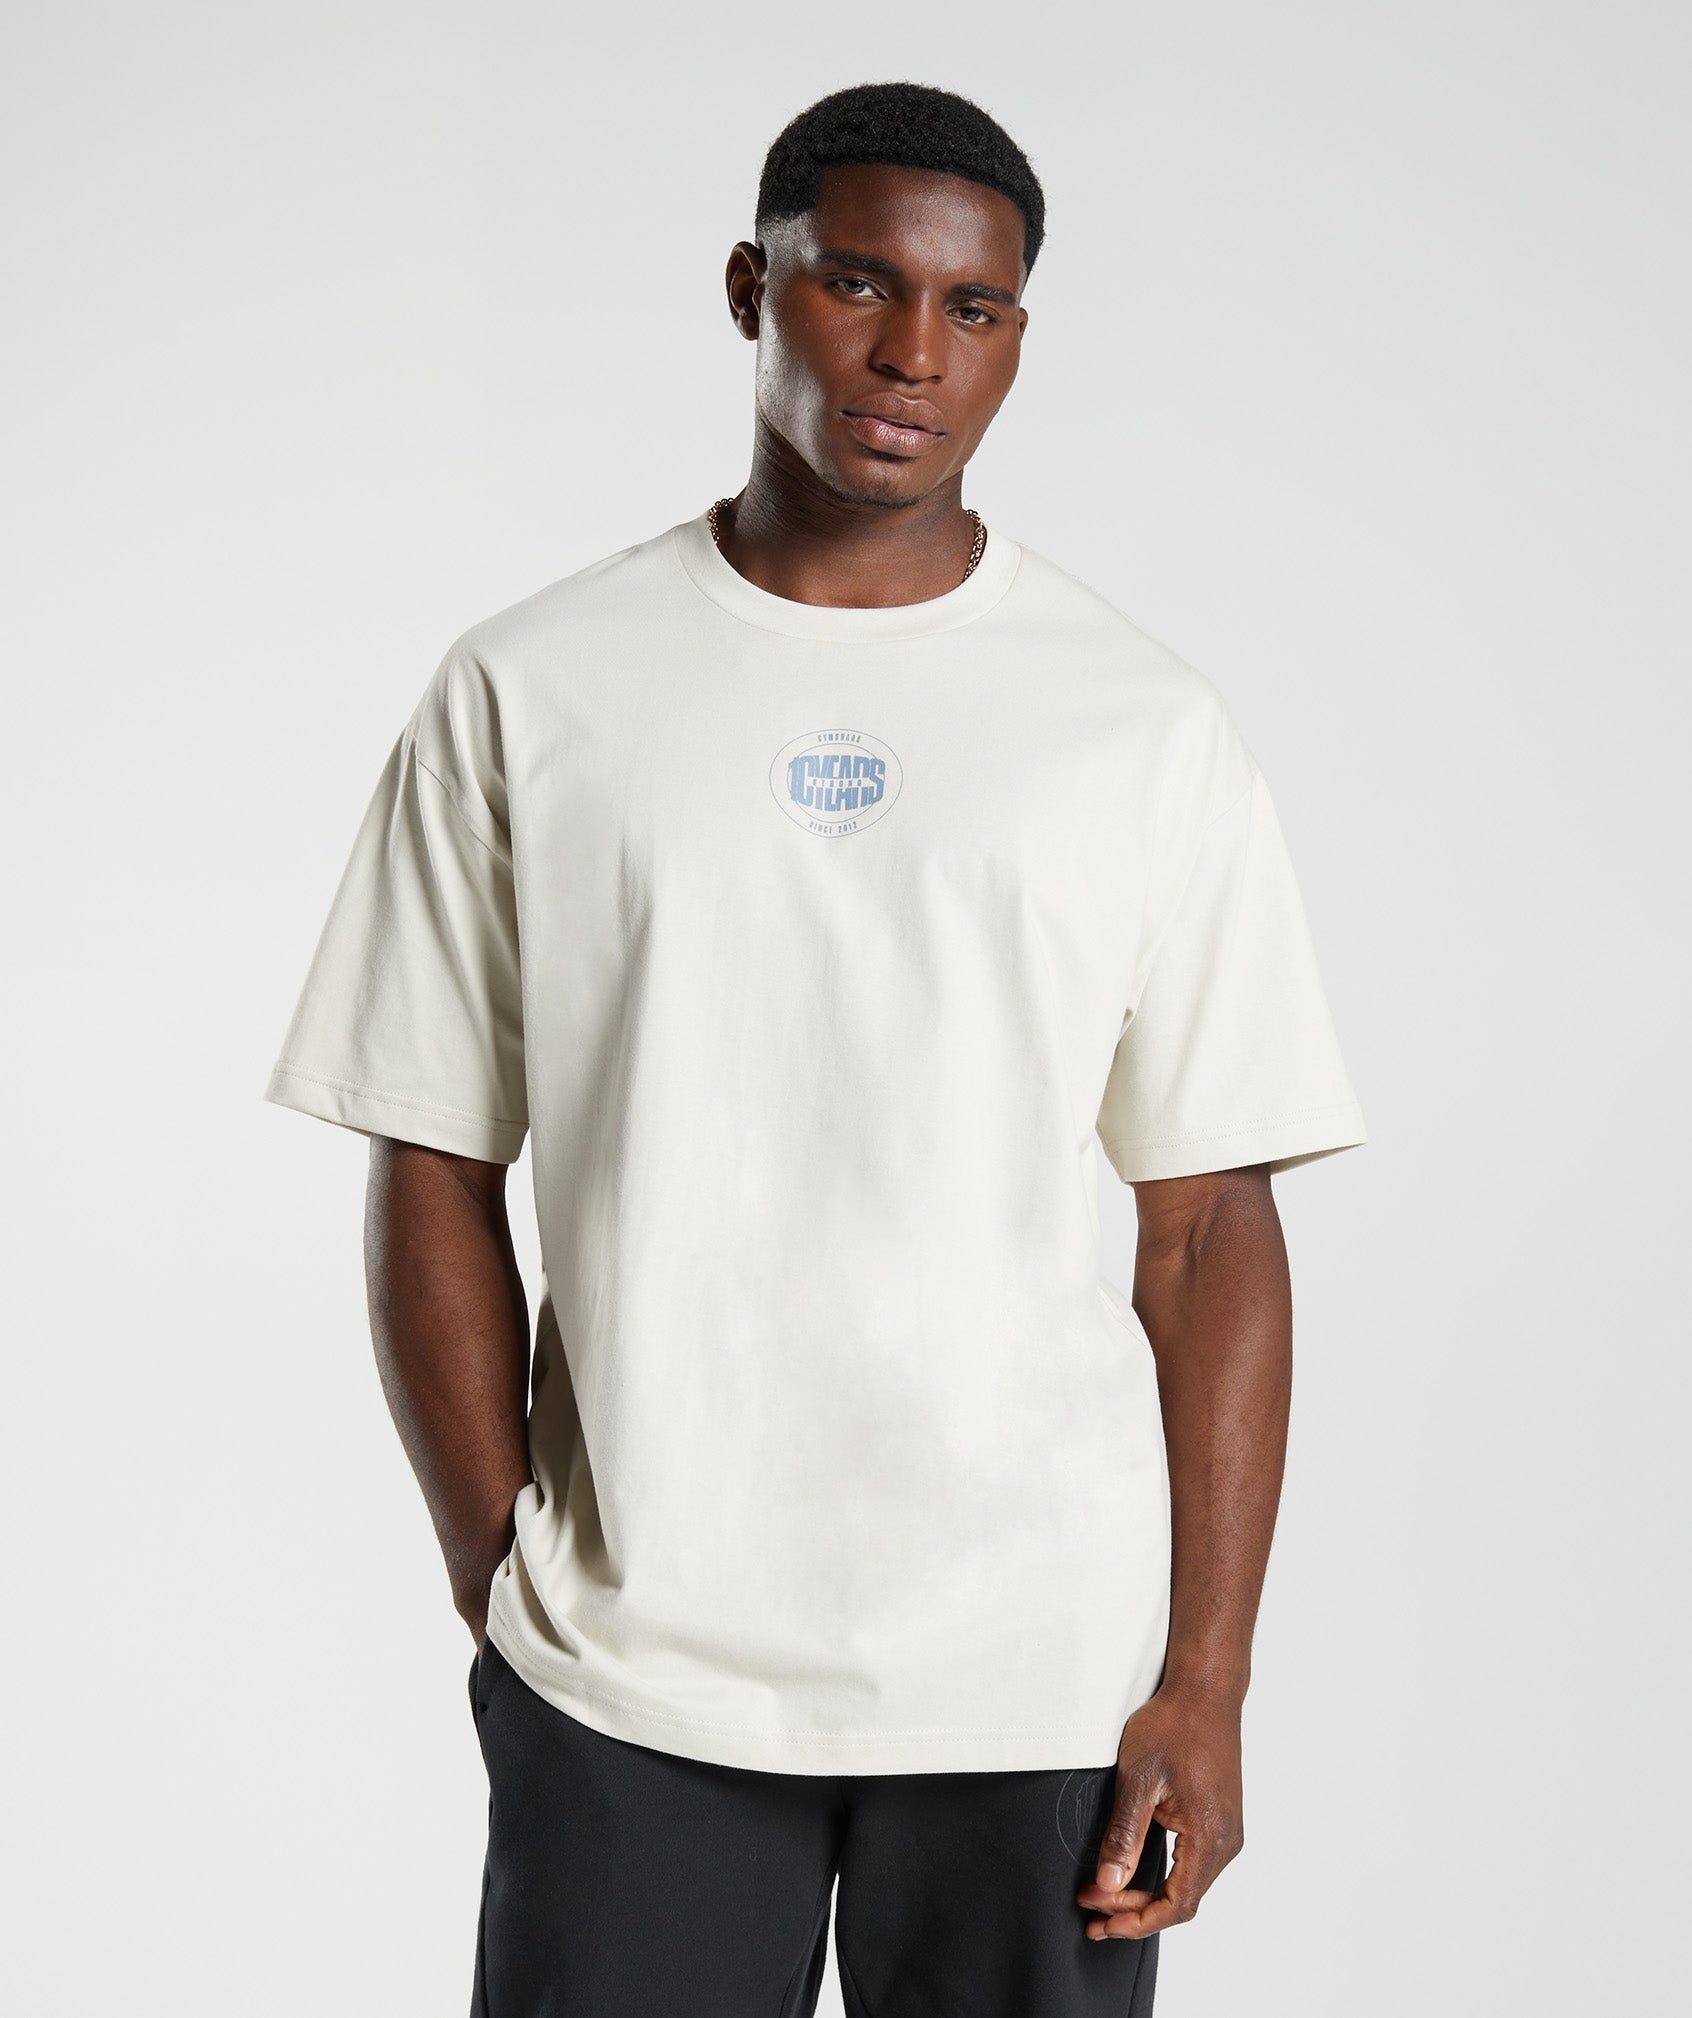 GS10 Year Oversized T-Shirt in {{variantColor} is out of stock